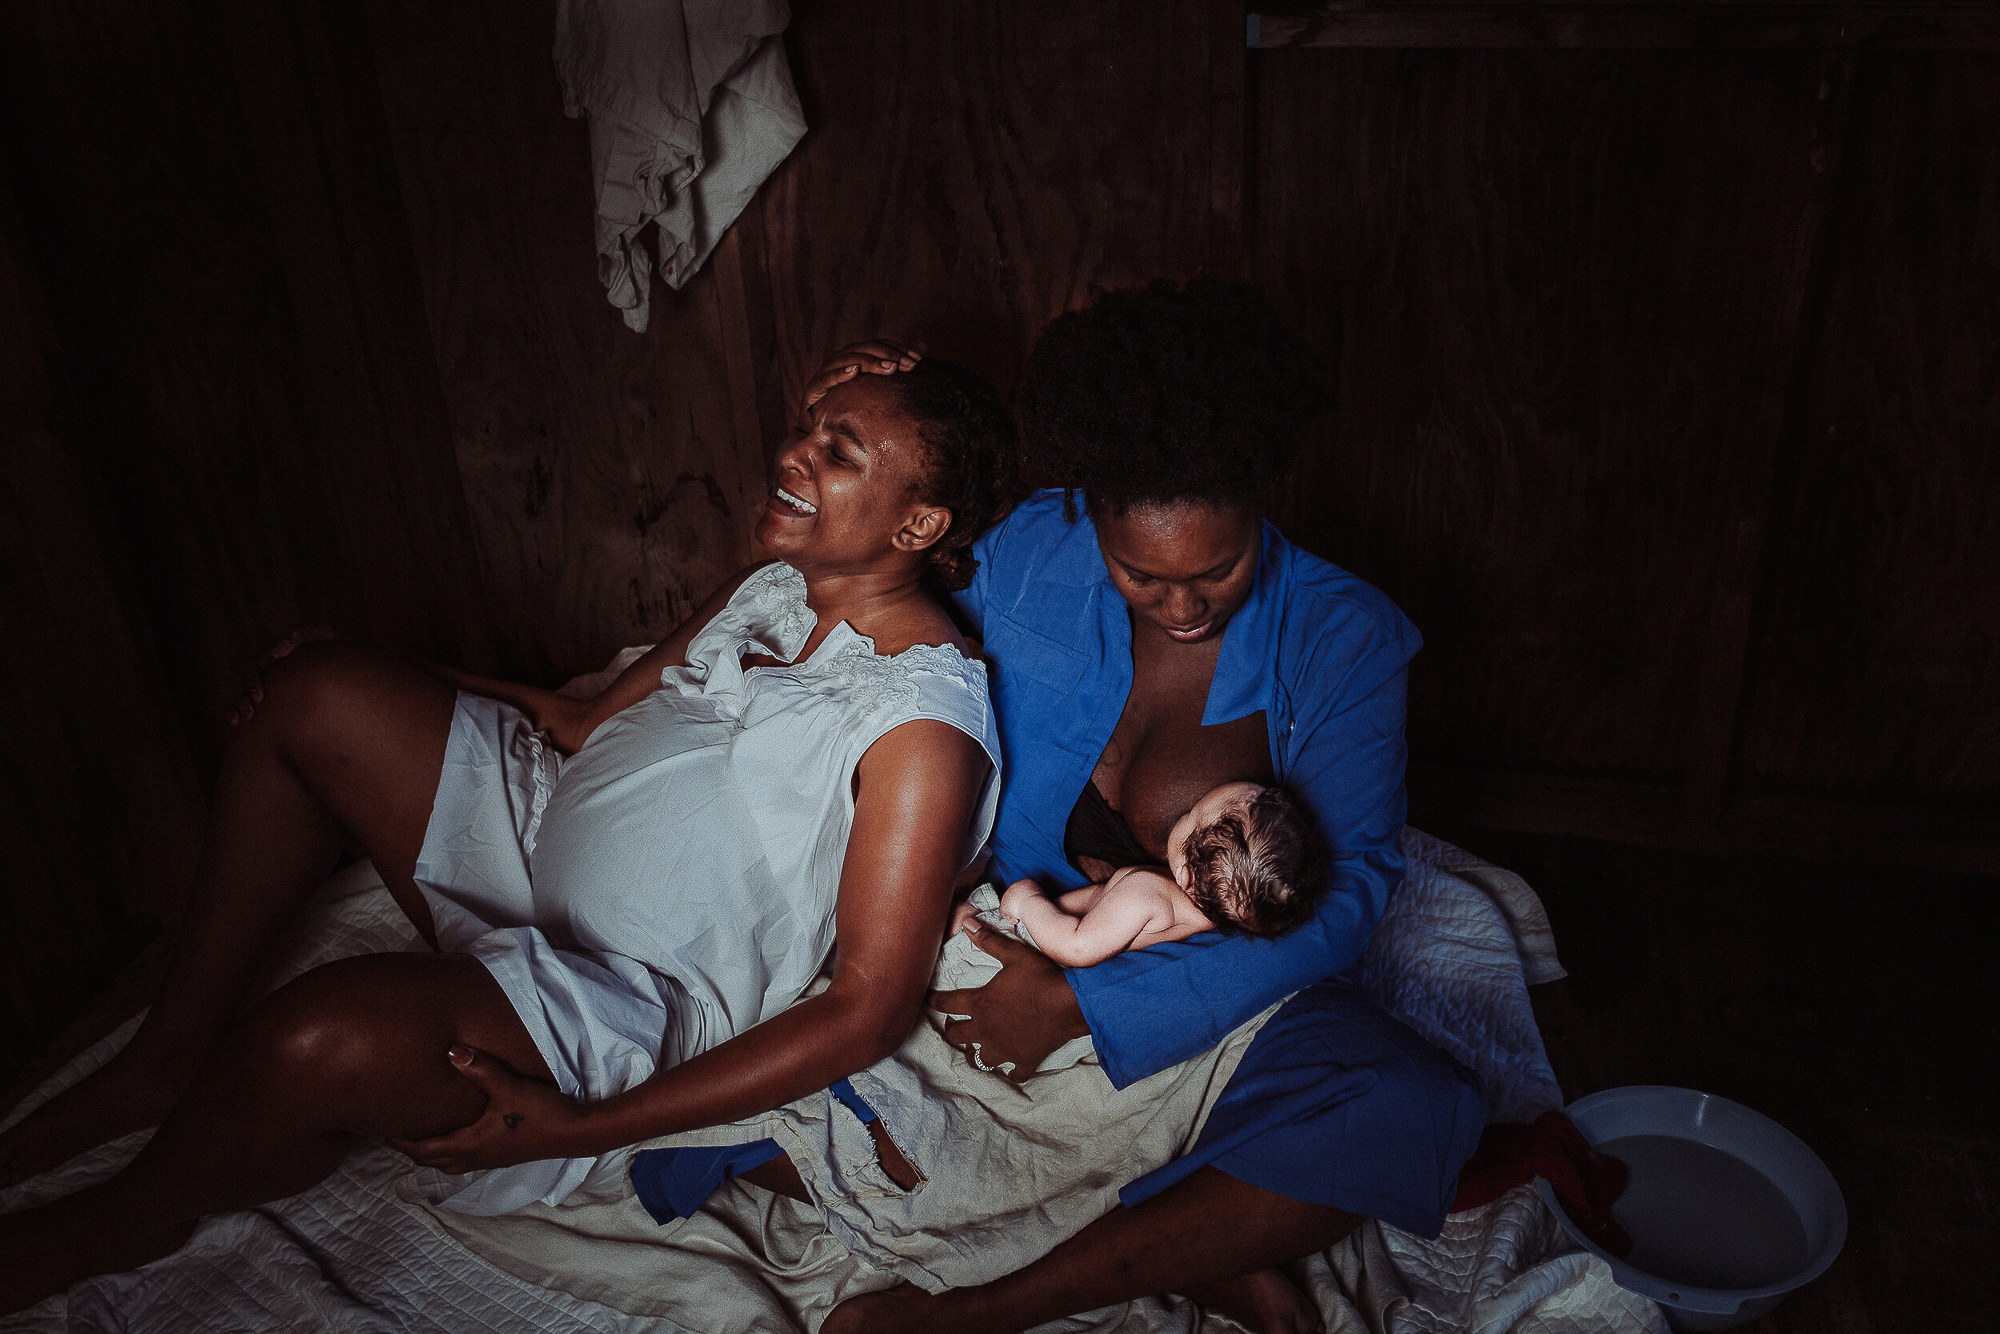 An image of a Black doula holding a newborn, next to a Black mother